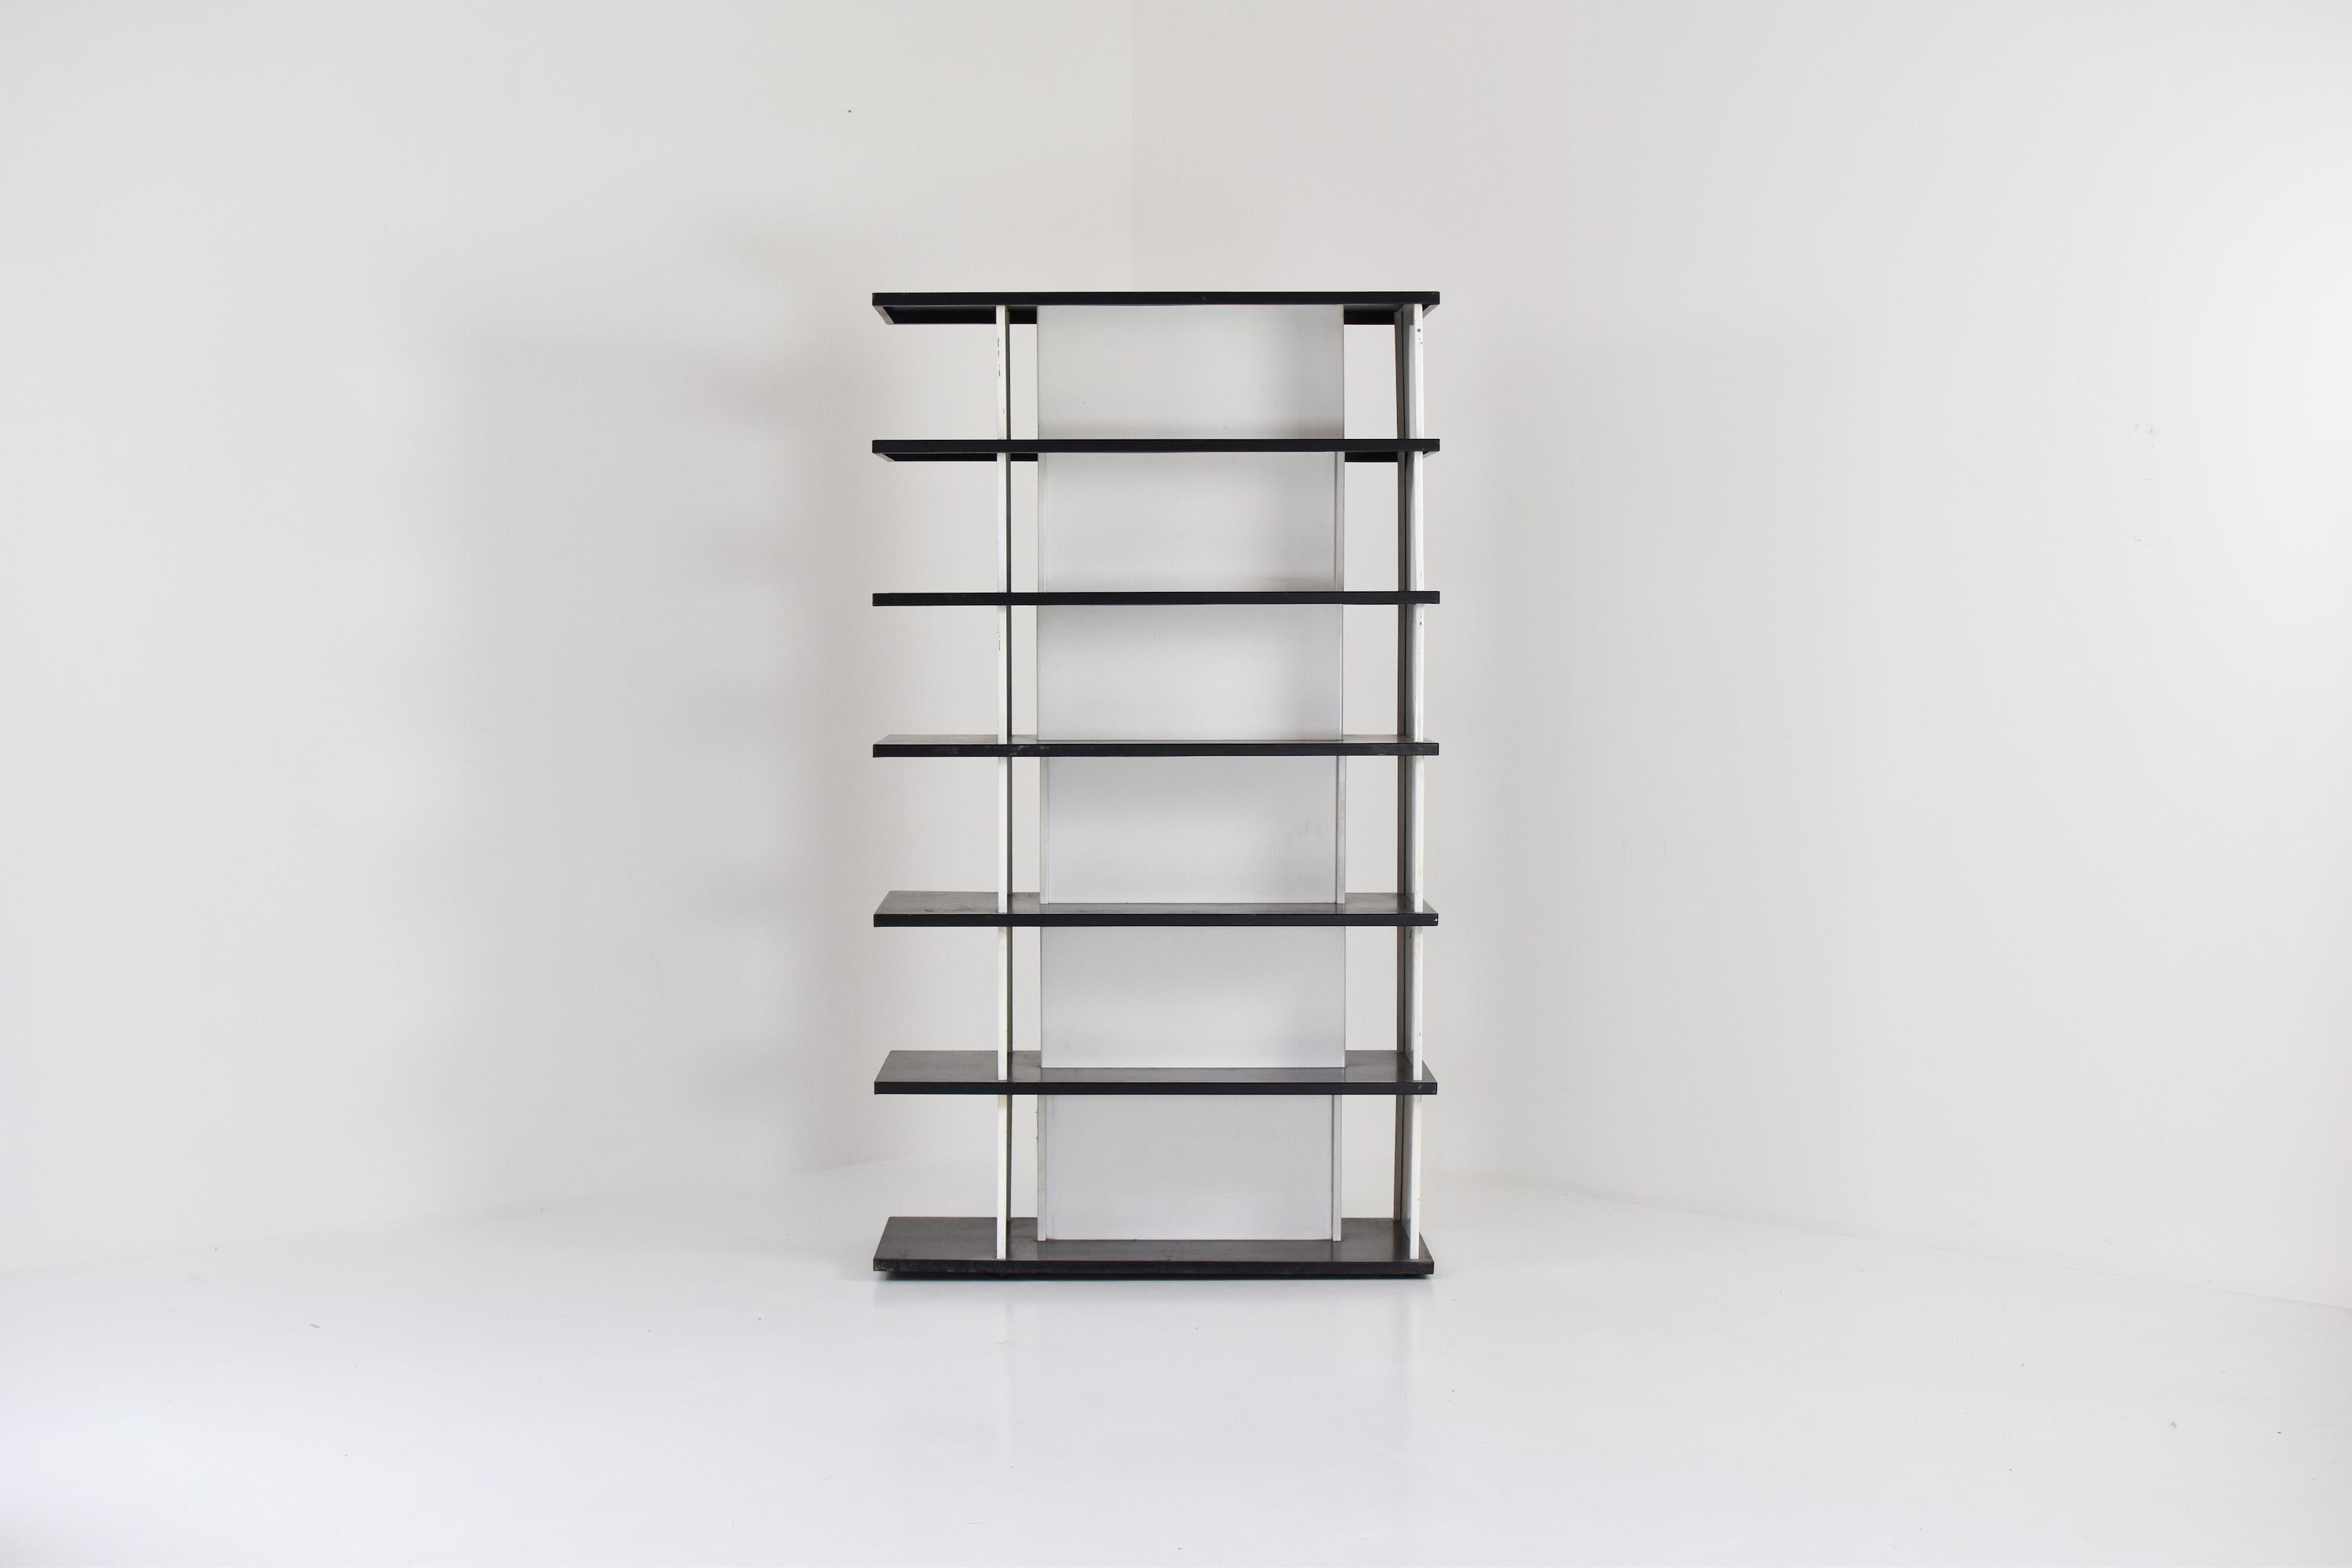 Impressive bookcase / room divider designed by Wim Rietveld for De Bijenkorf, The Netherlands 1960’s. This bookcase stands on its own, its double sided so you can also use this as a room divider. This bookcase has its original black and white color.